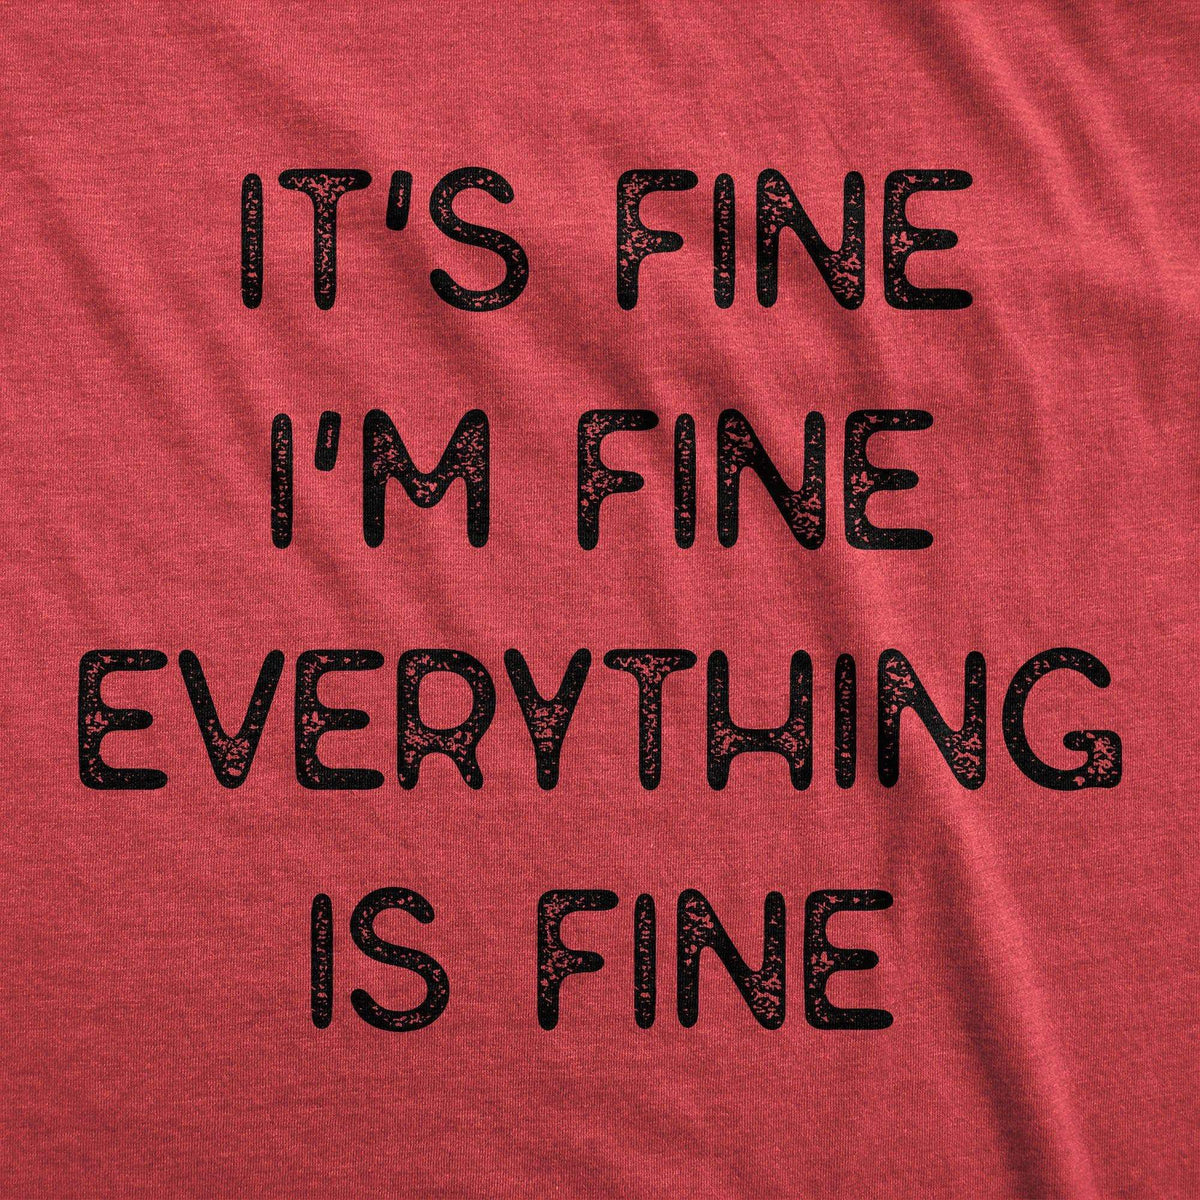 Everything Is Fine Men&#39;s Tshirt  -  Crazy Dog T-Shirts